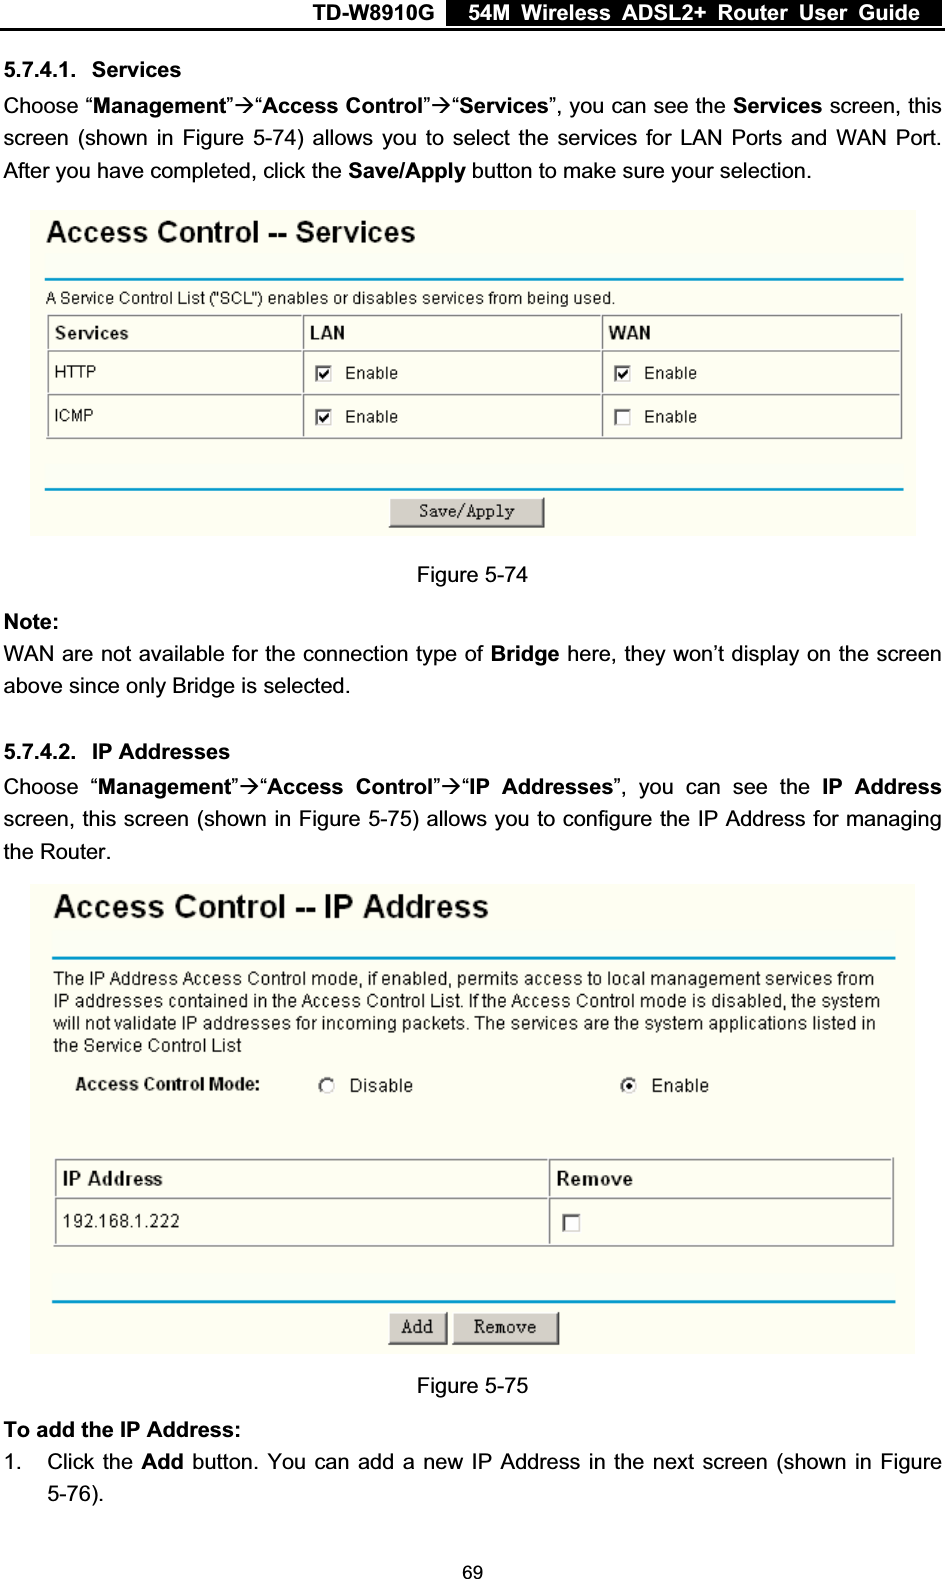 TD-W8910G    54M Wireless ADSL2+ Router User Guide  5.7.4.1. ServicesChoose “Management”Æ“Access Control”Æ“Services”, you can see the Services screen, this screen (shown in Figure 5-74) allows you to select the services for LAN Ports and WAN Port. After you have completed, click the Save/Apply button to make sure your selection. Figure 5-74 Note:WAN are not available for the connection type of Bridge here, they won’t display on the screen above since only Bridge is selected. 5.7.4.2. IP Addresses Choose “Management”Æ“Access Control”Æ“IP Addresses”, you can see the IP Address screen, this screen (shown in Figure 5-75) allows you to configure the IP Address for managing the Router. Figure 5-75 To add the IP Address:1. Click the Add button. You can add a new IP Address in the next screen (shown in Figure 5-76). 69